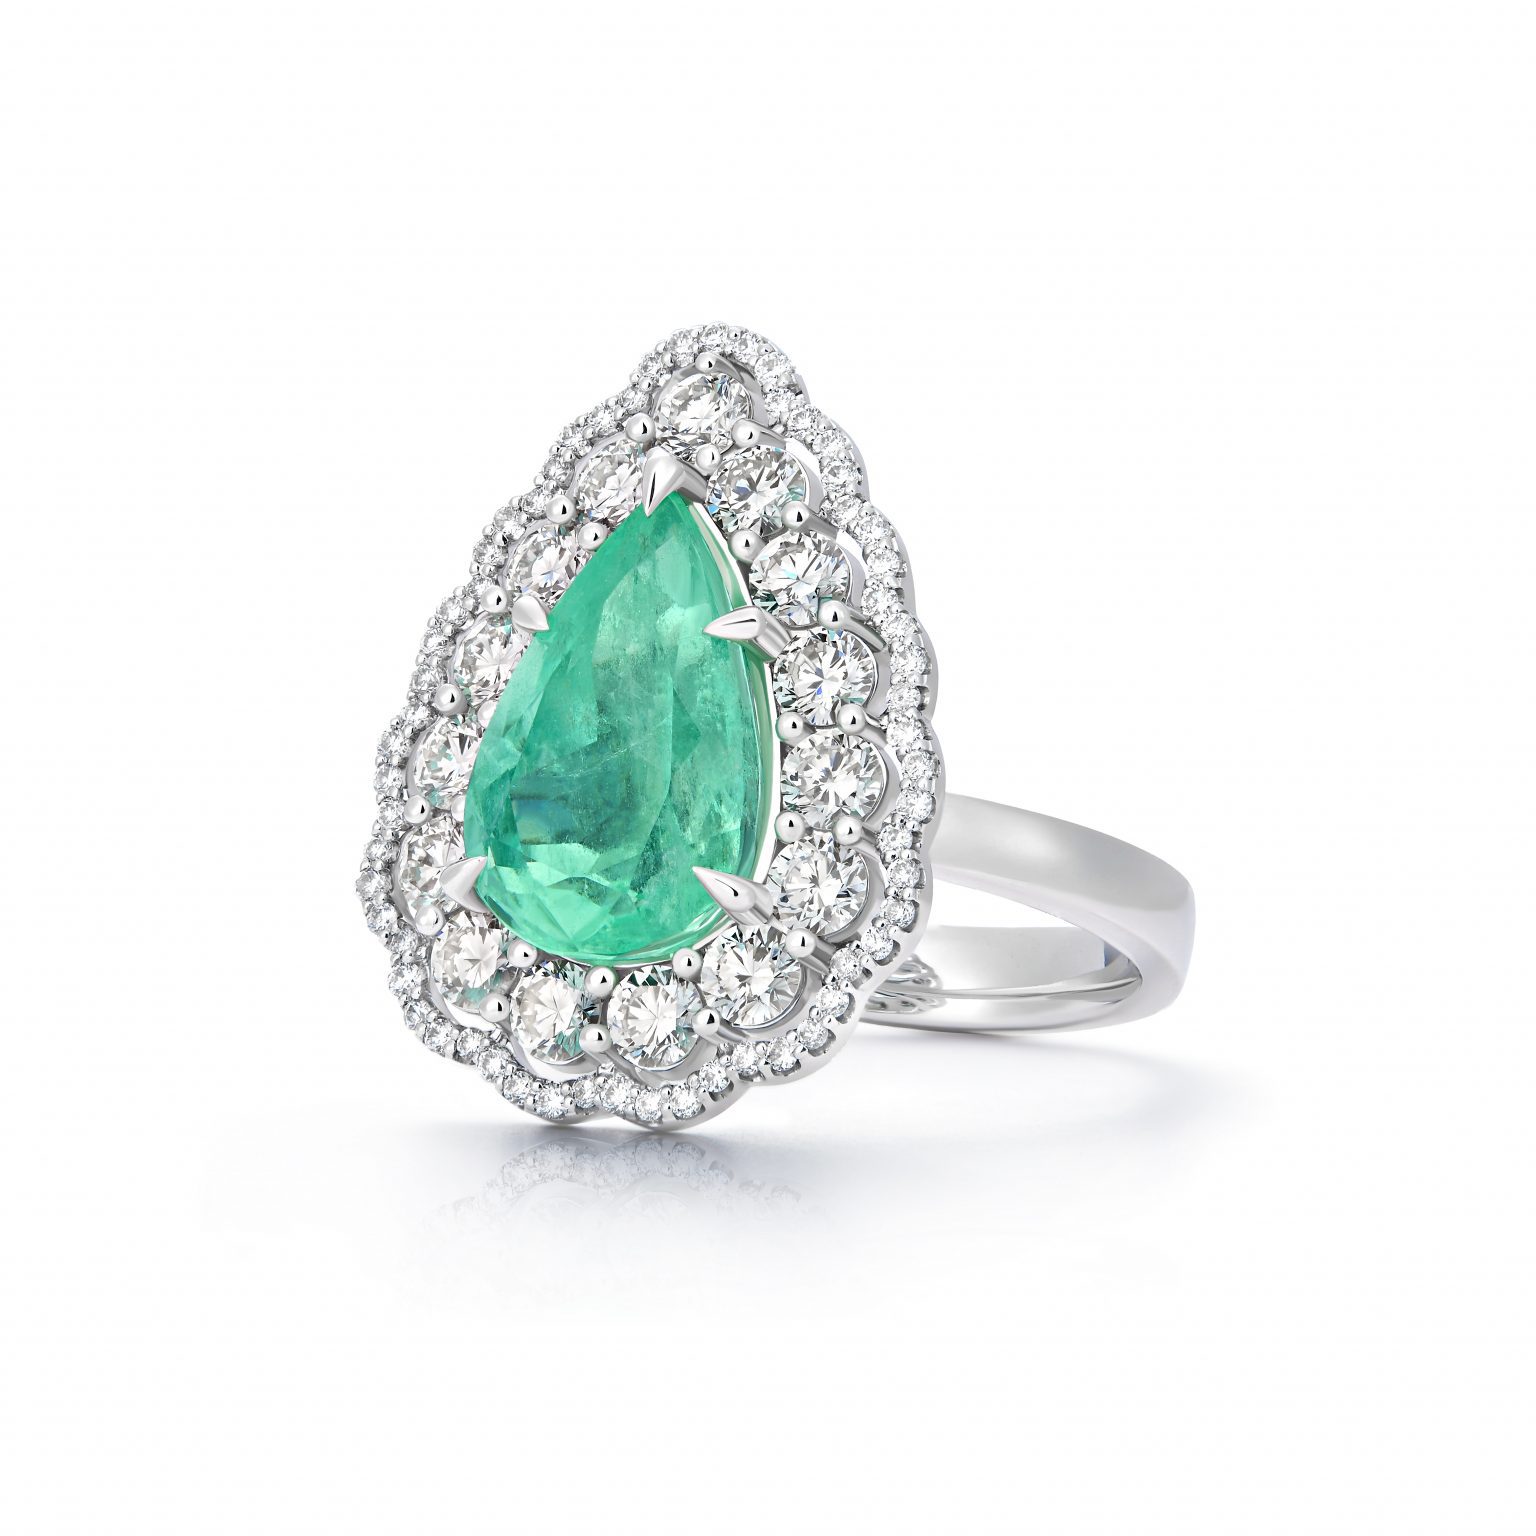 4.88 ct Pear Shaped Colombian Emerald Ring